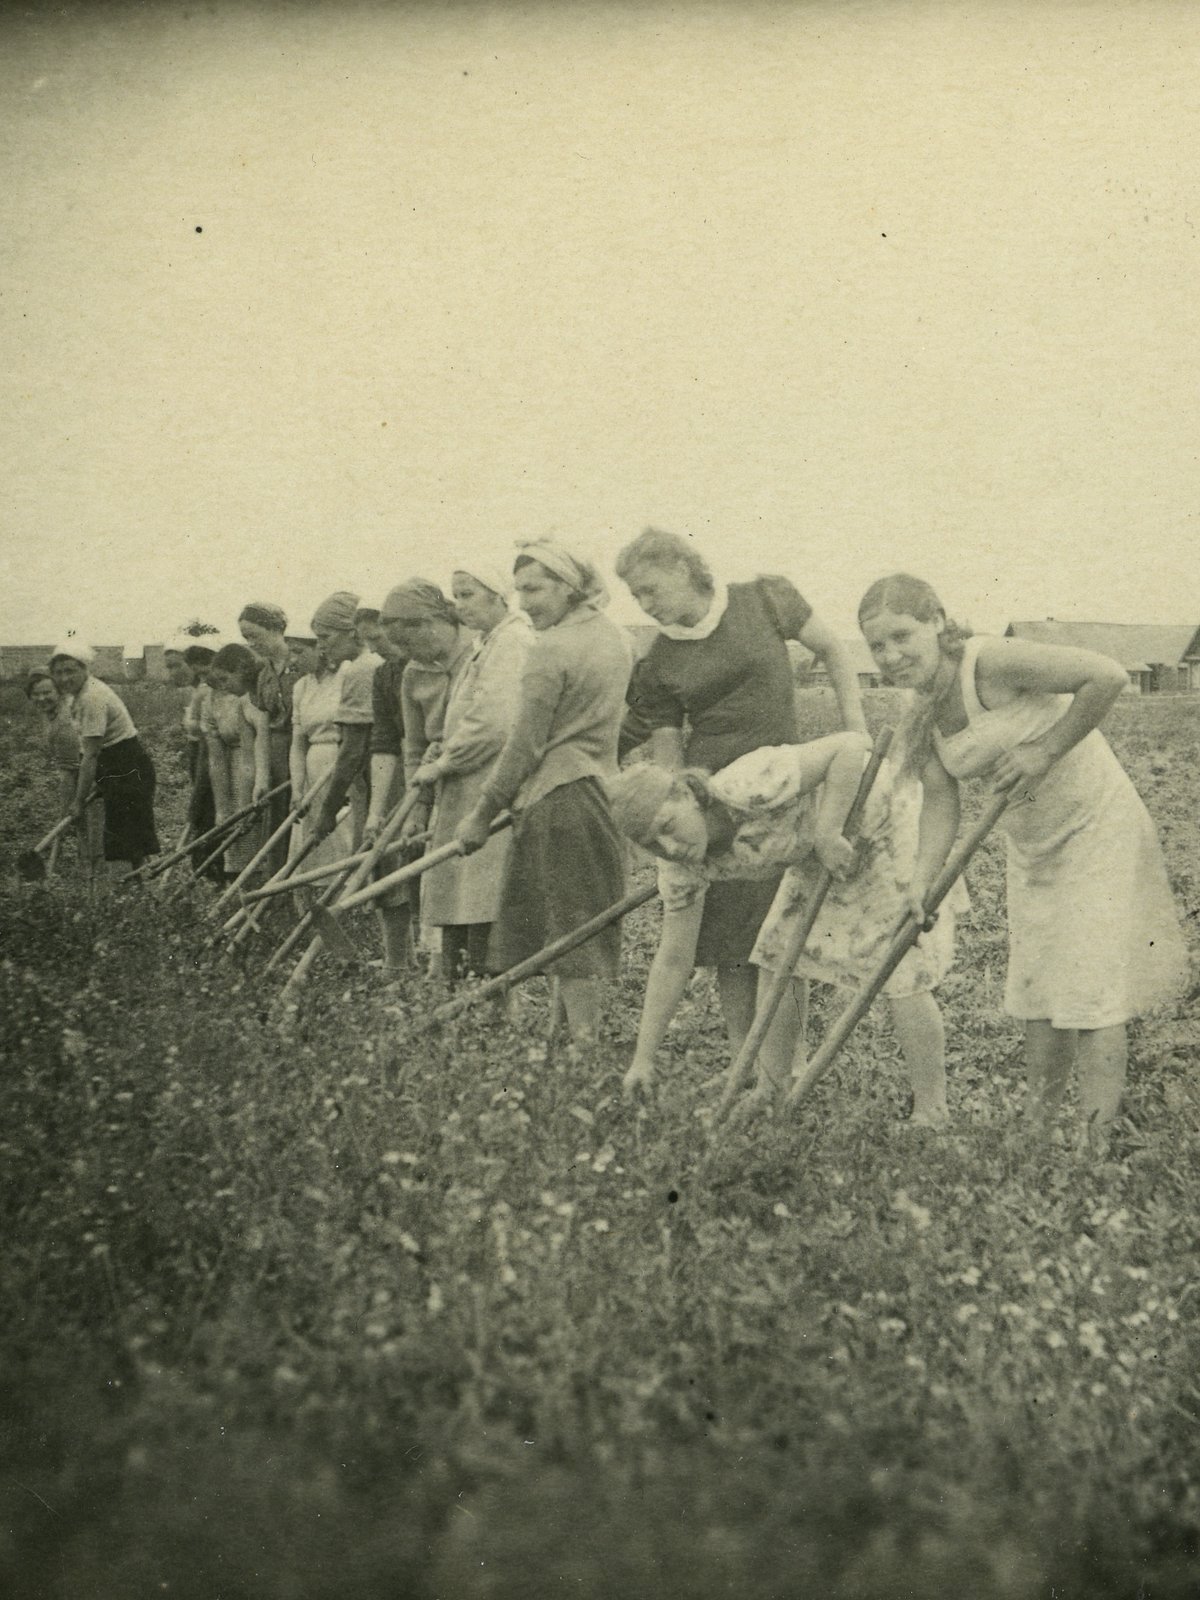 Women with garden hoes, year unknown From a found archiveCourtesy of Olga Grotova